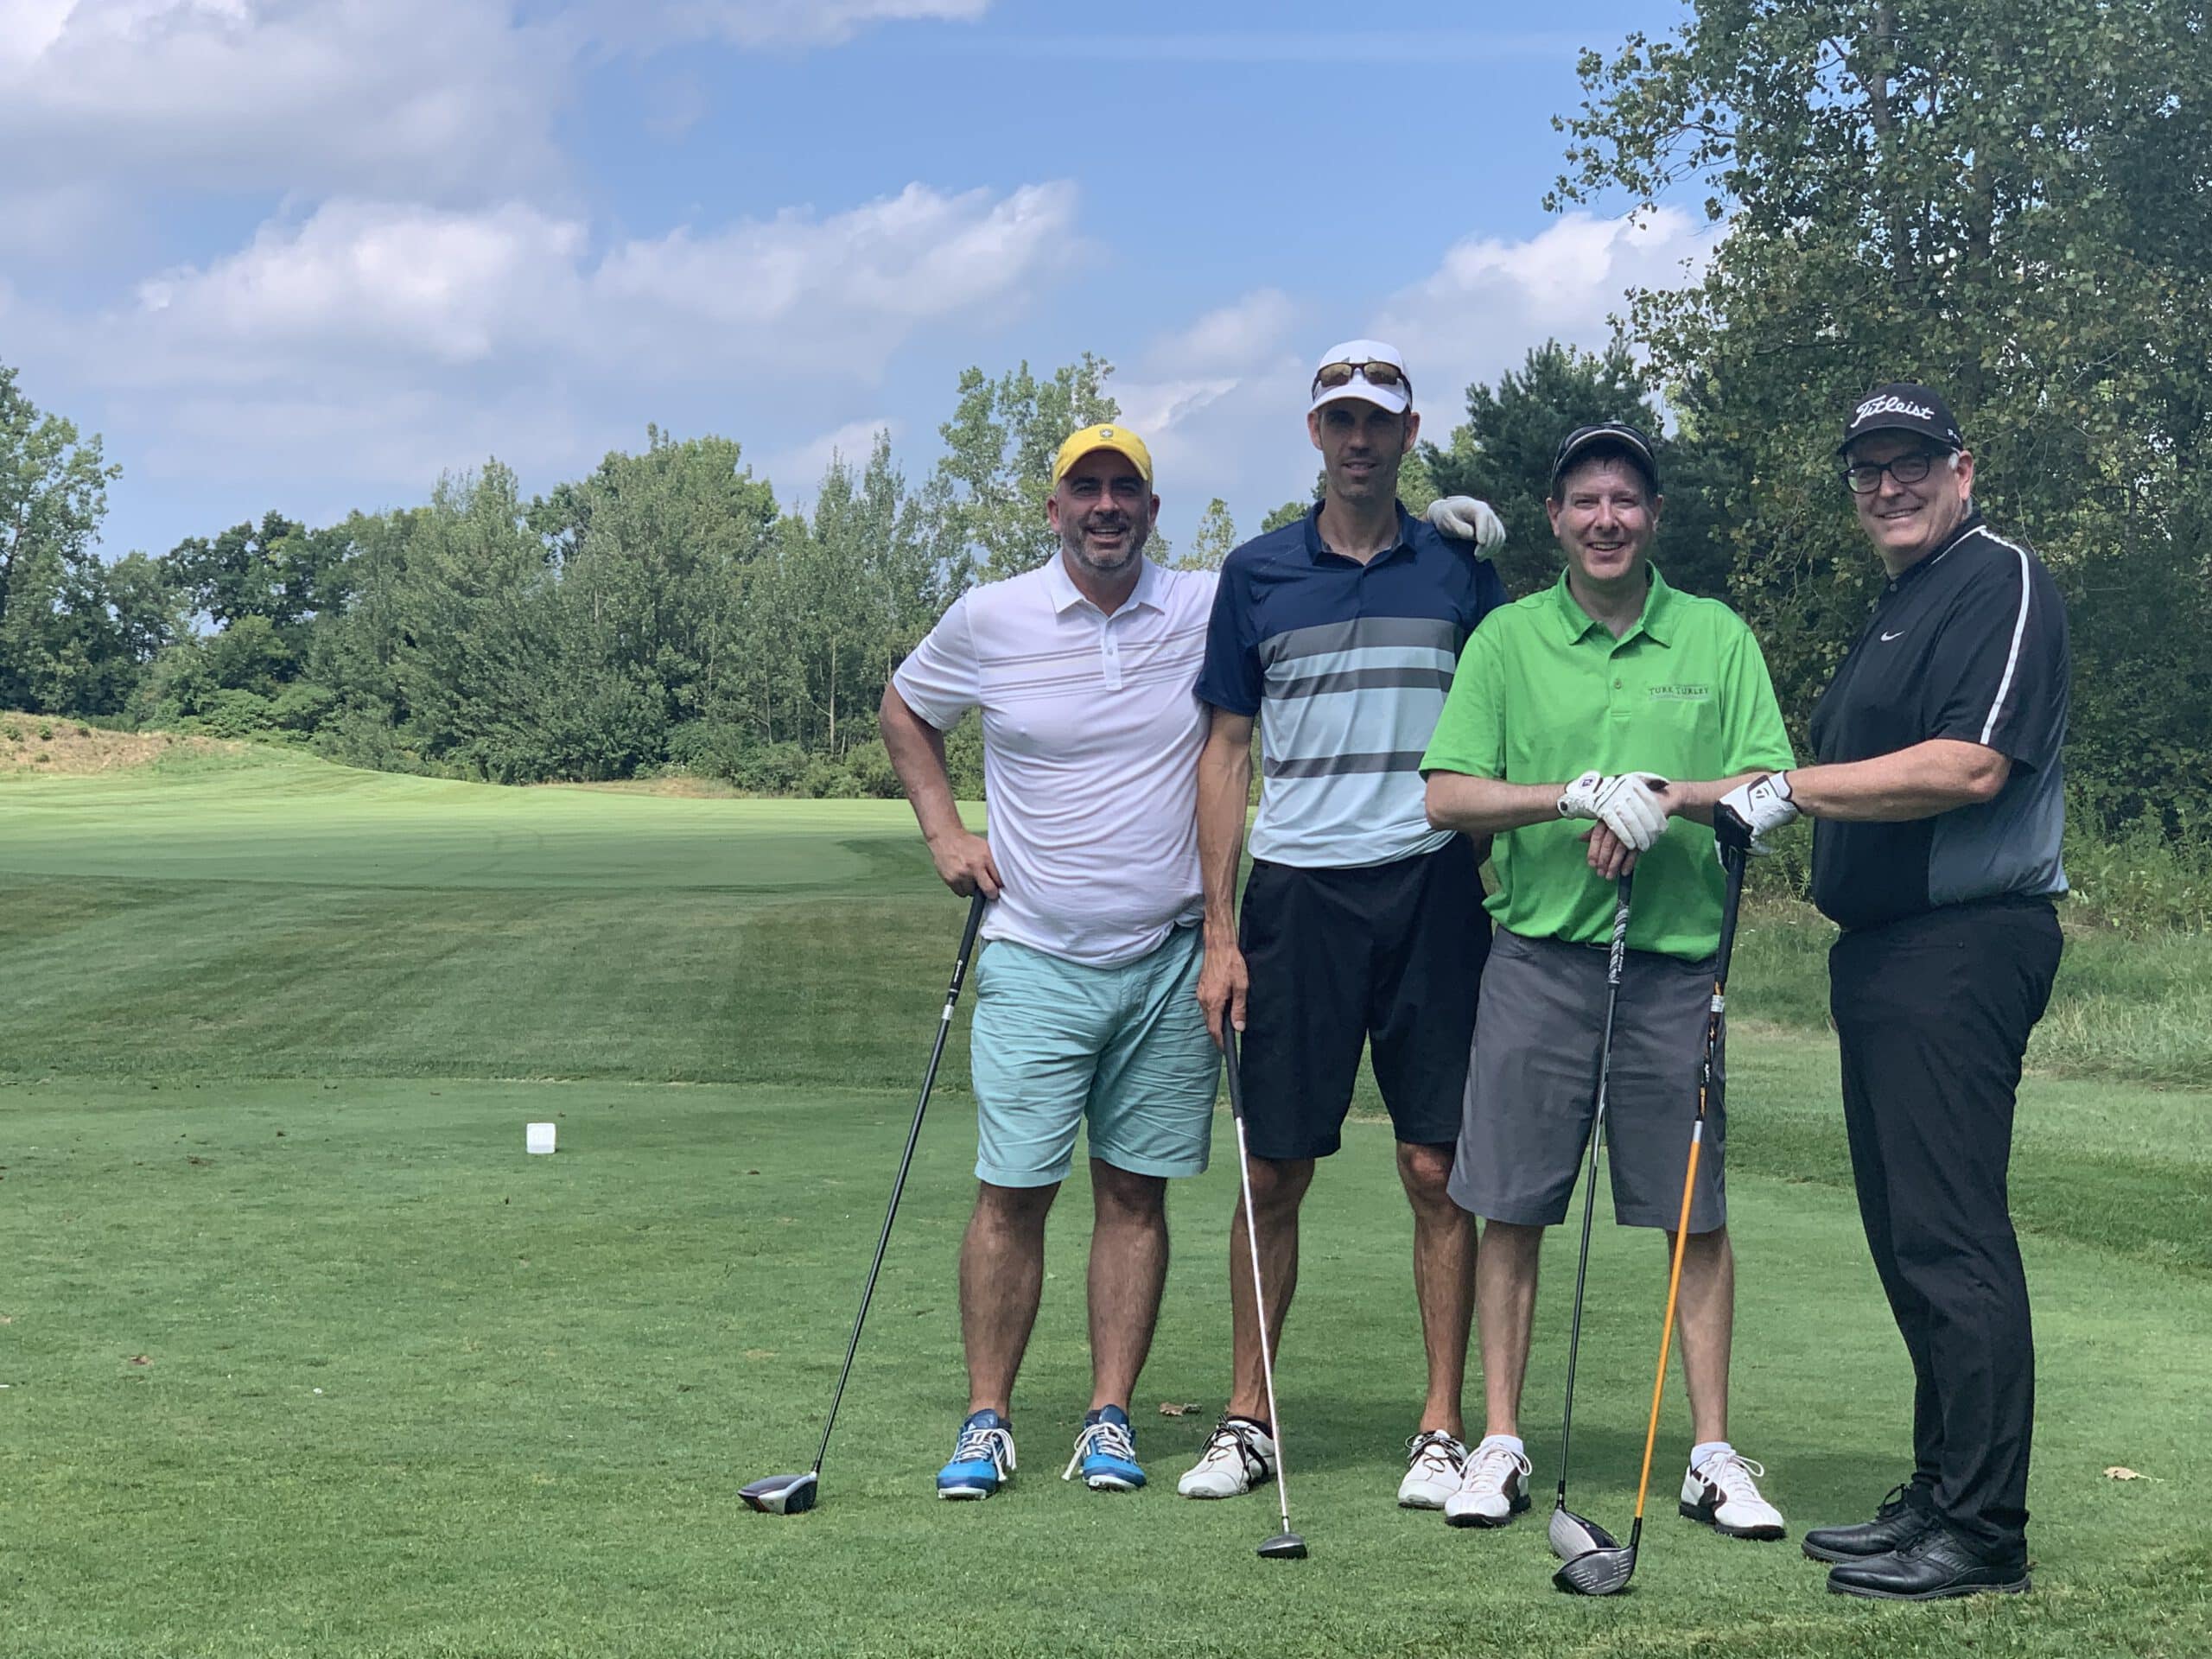 For Ford Keast LLP team members at the 11th Annual Boston Pizza Charity Golf Classic